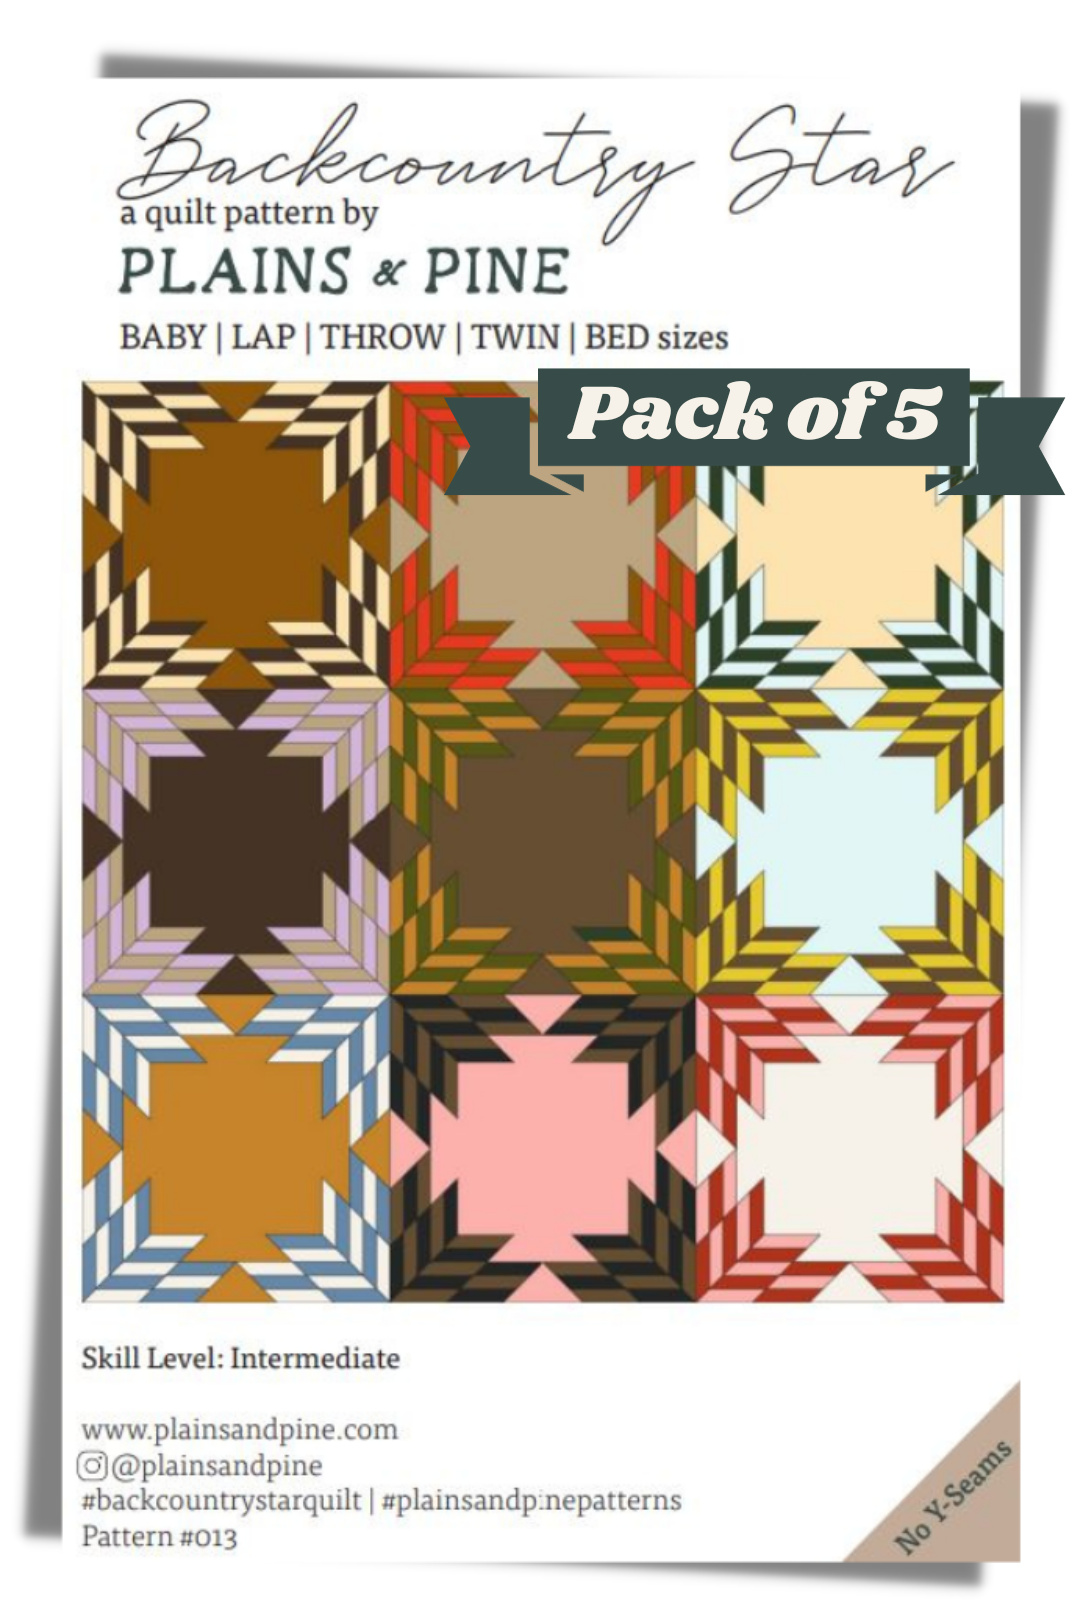 WHOLESALE - Backcountry Star Quilt Pattern, Pack of 5 patterns